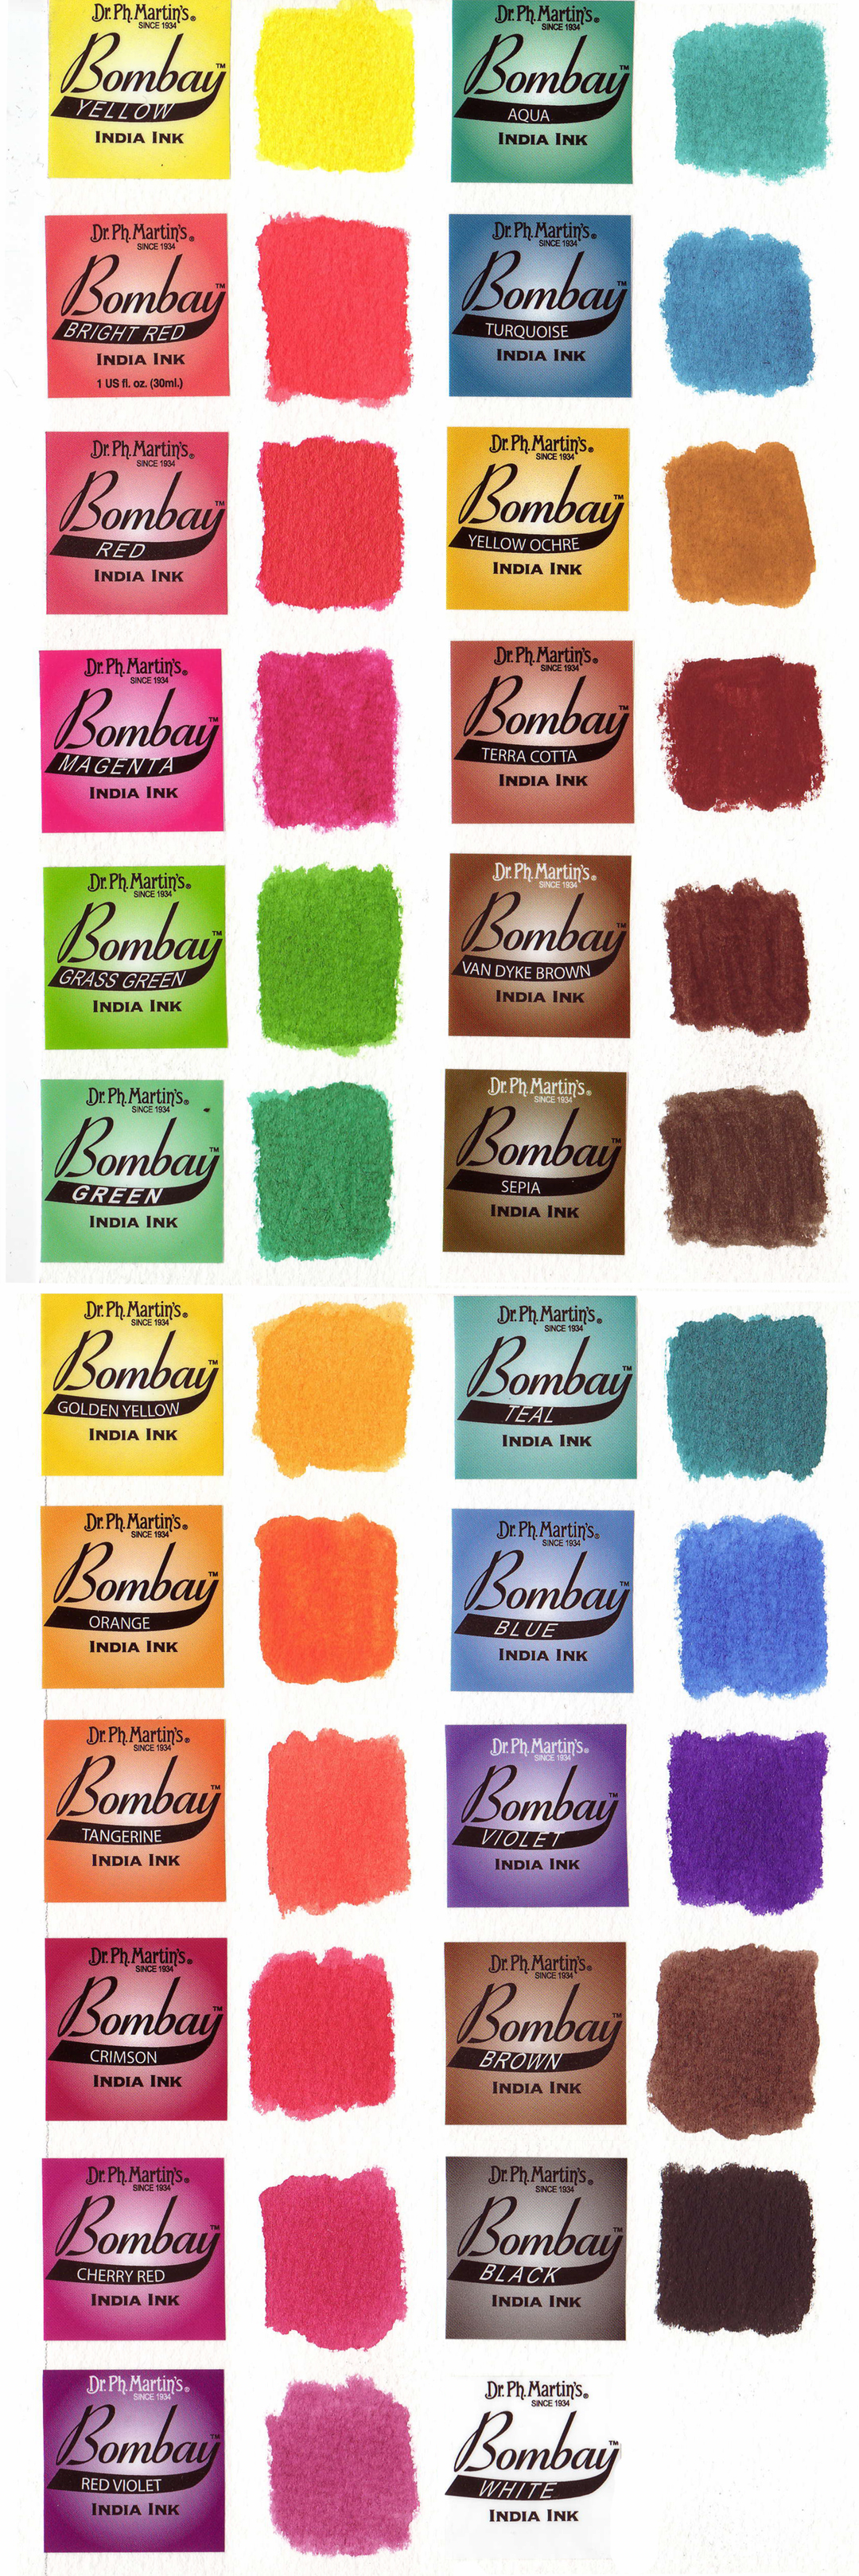 Dr. Ph. Martin's Bombay India Ink Color Chart